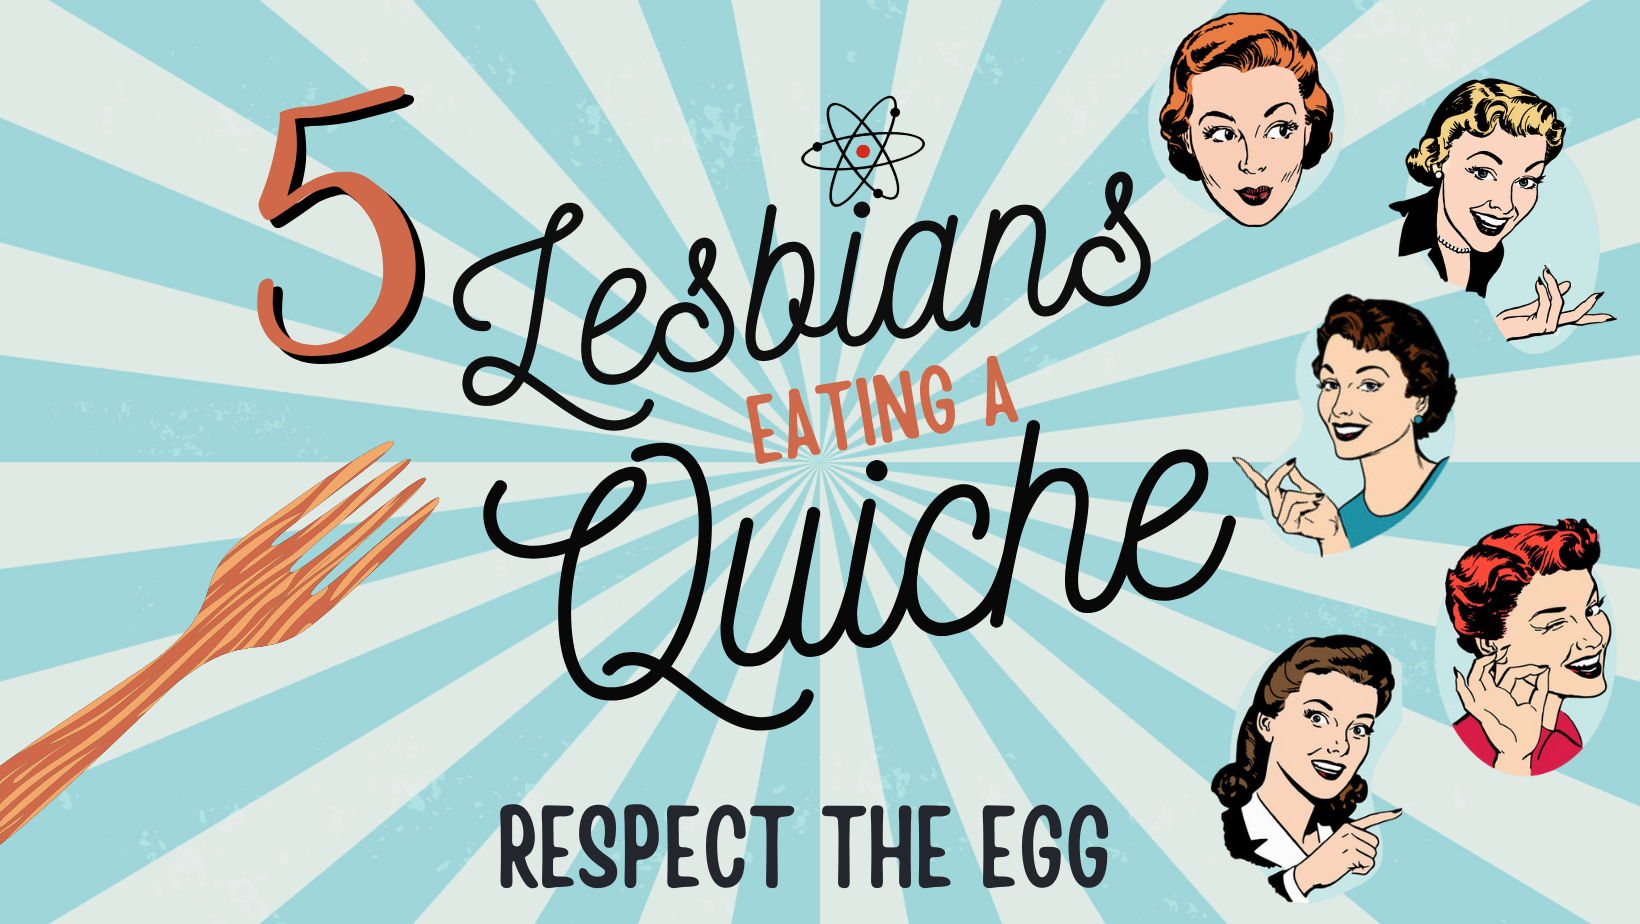 Poster for 5 Lesbians Eating a Quiche